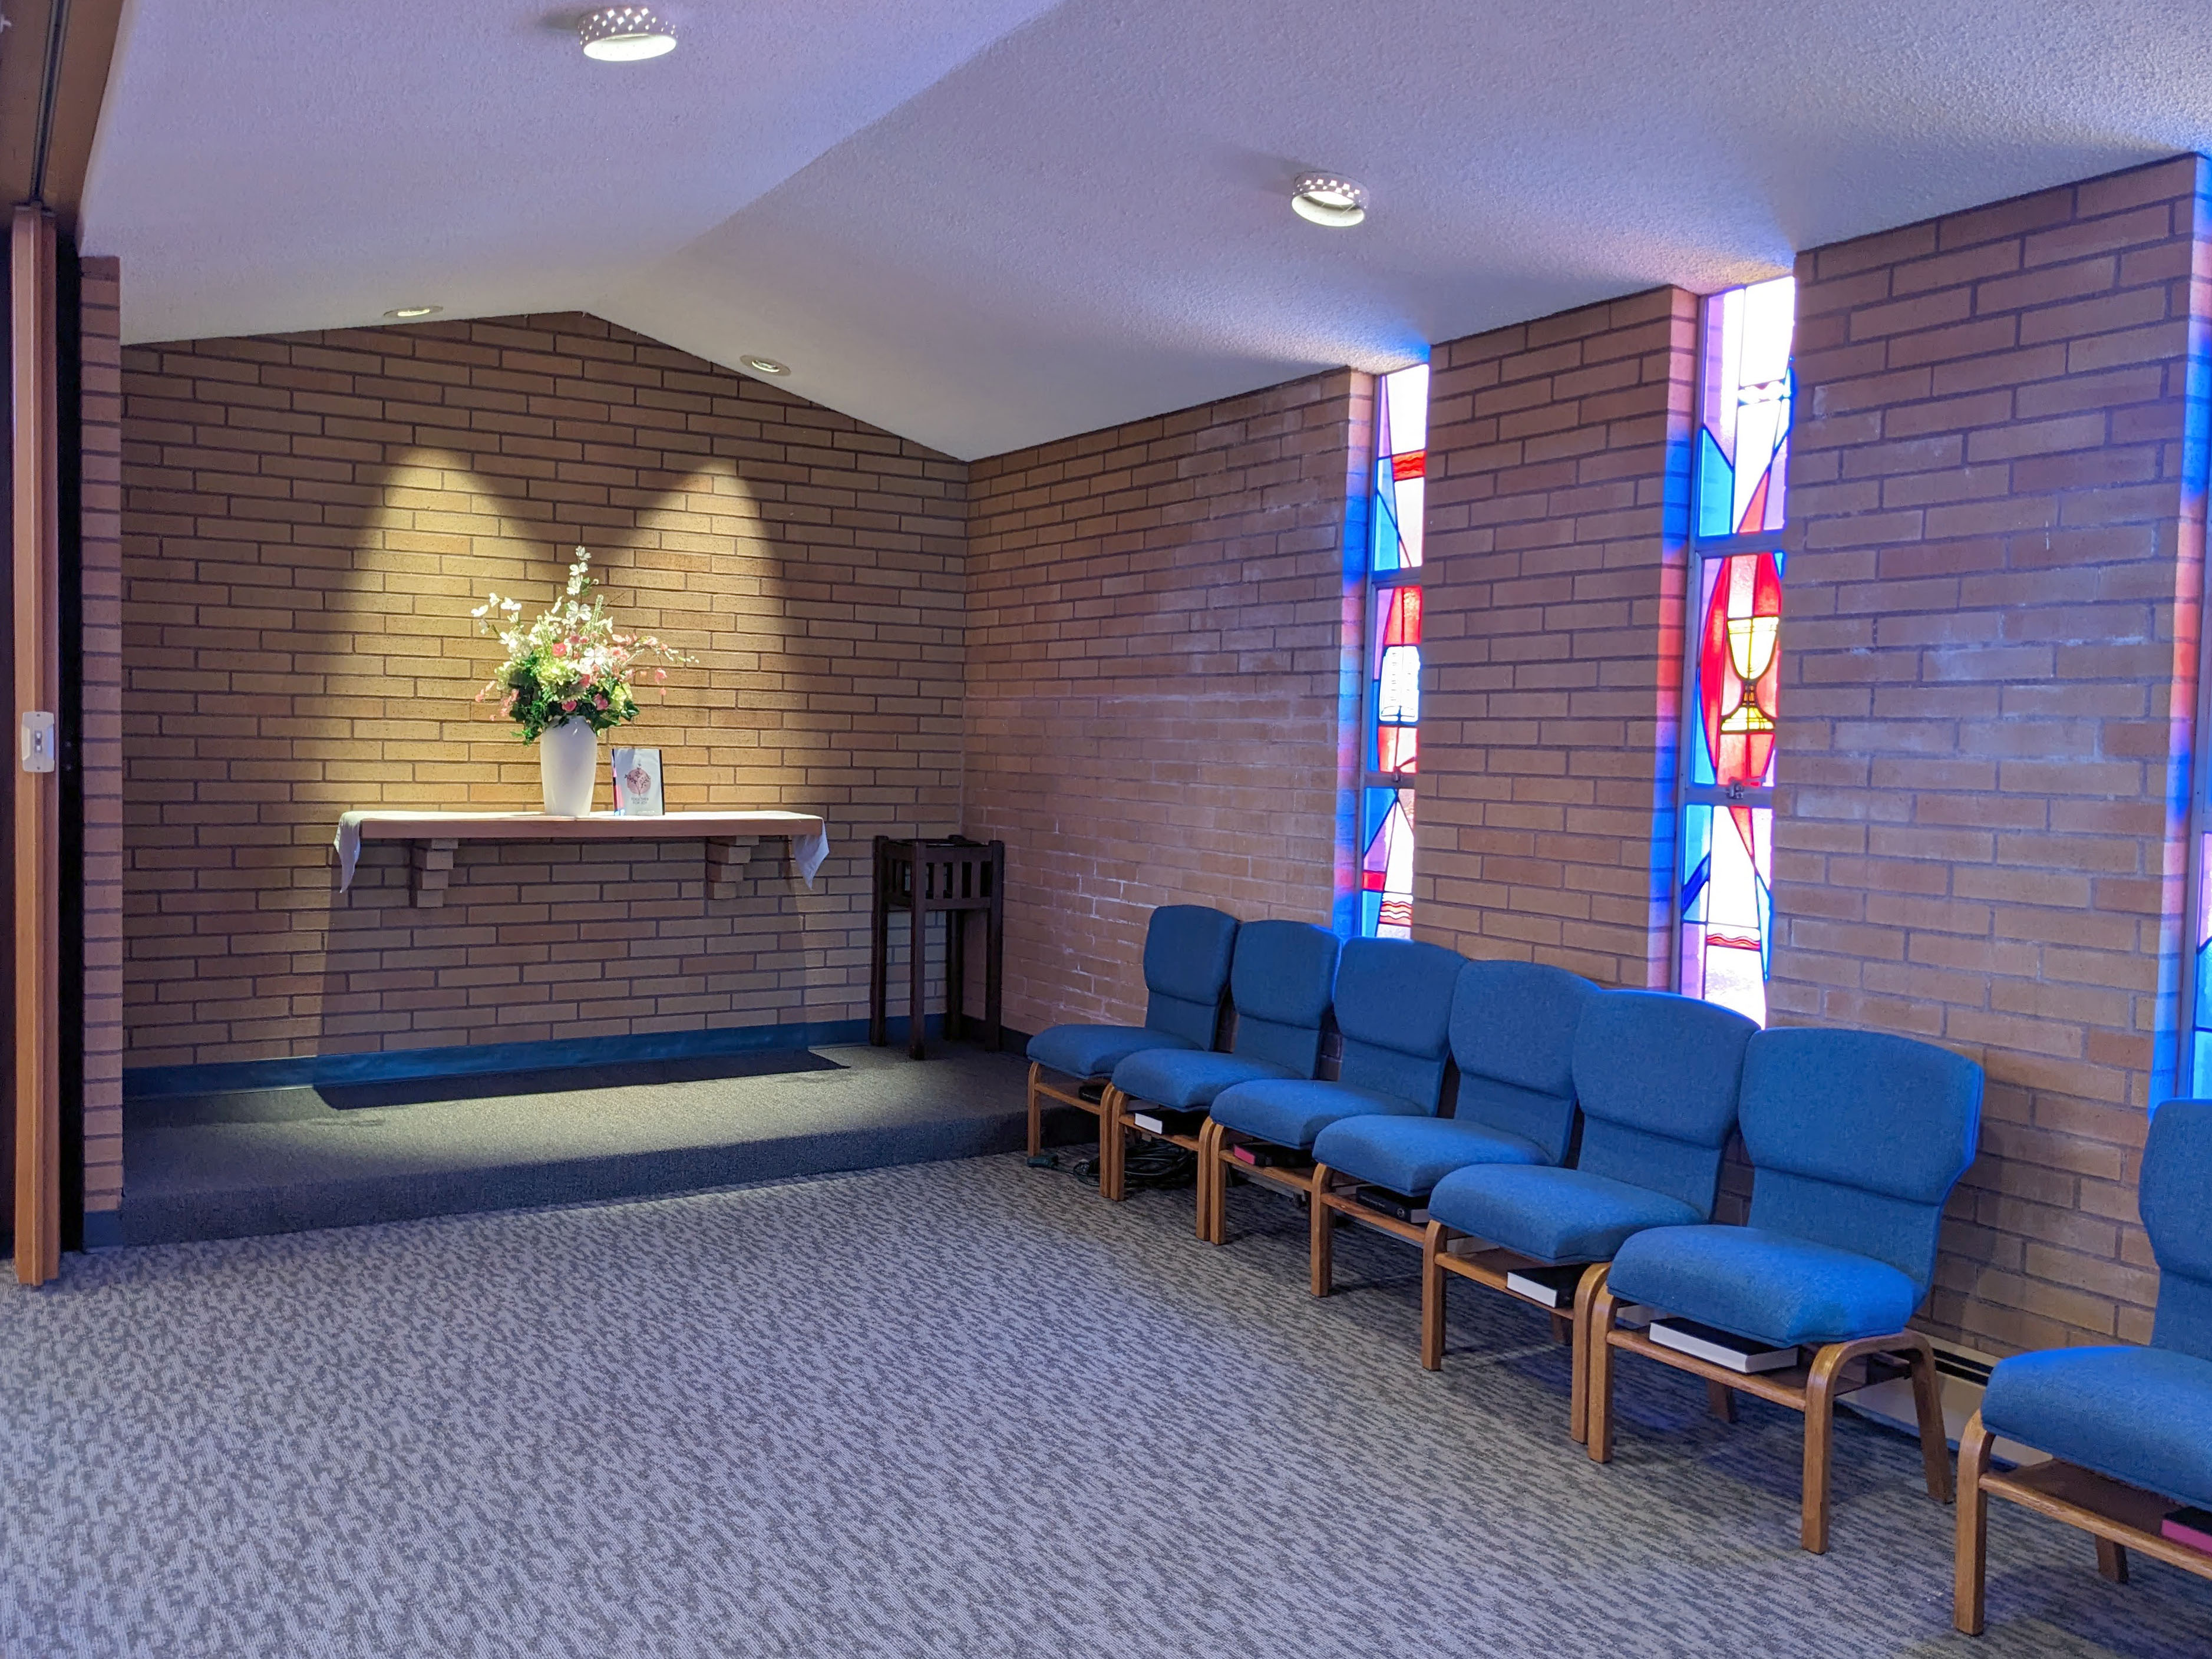 Chapel space with chairs